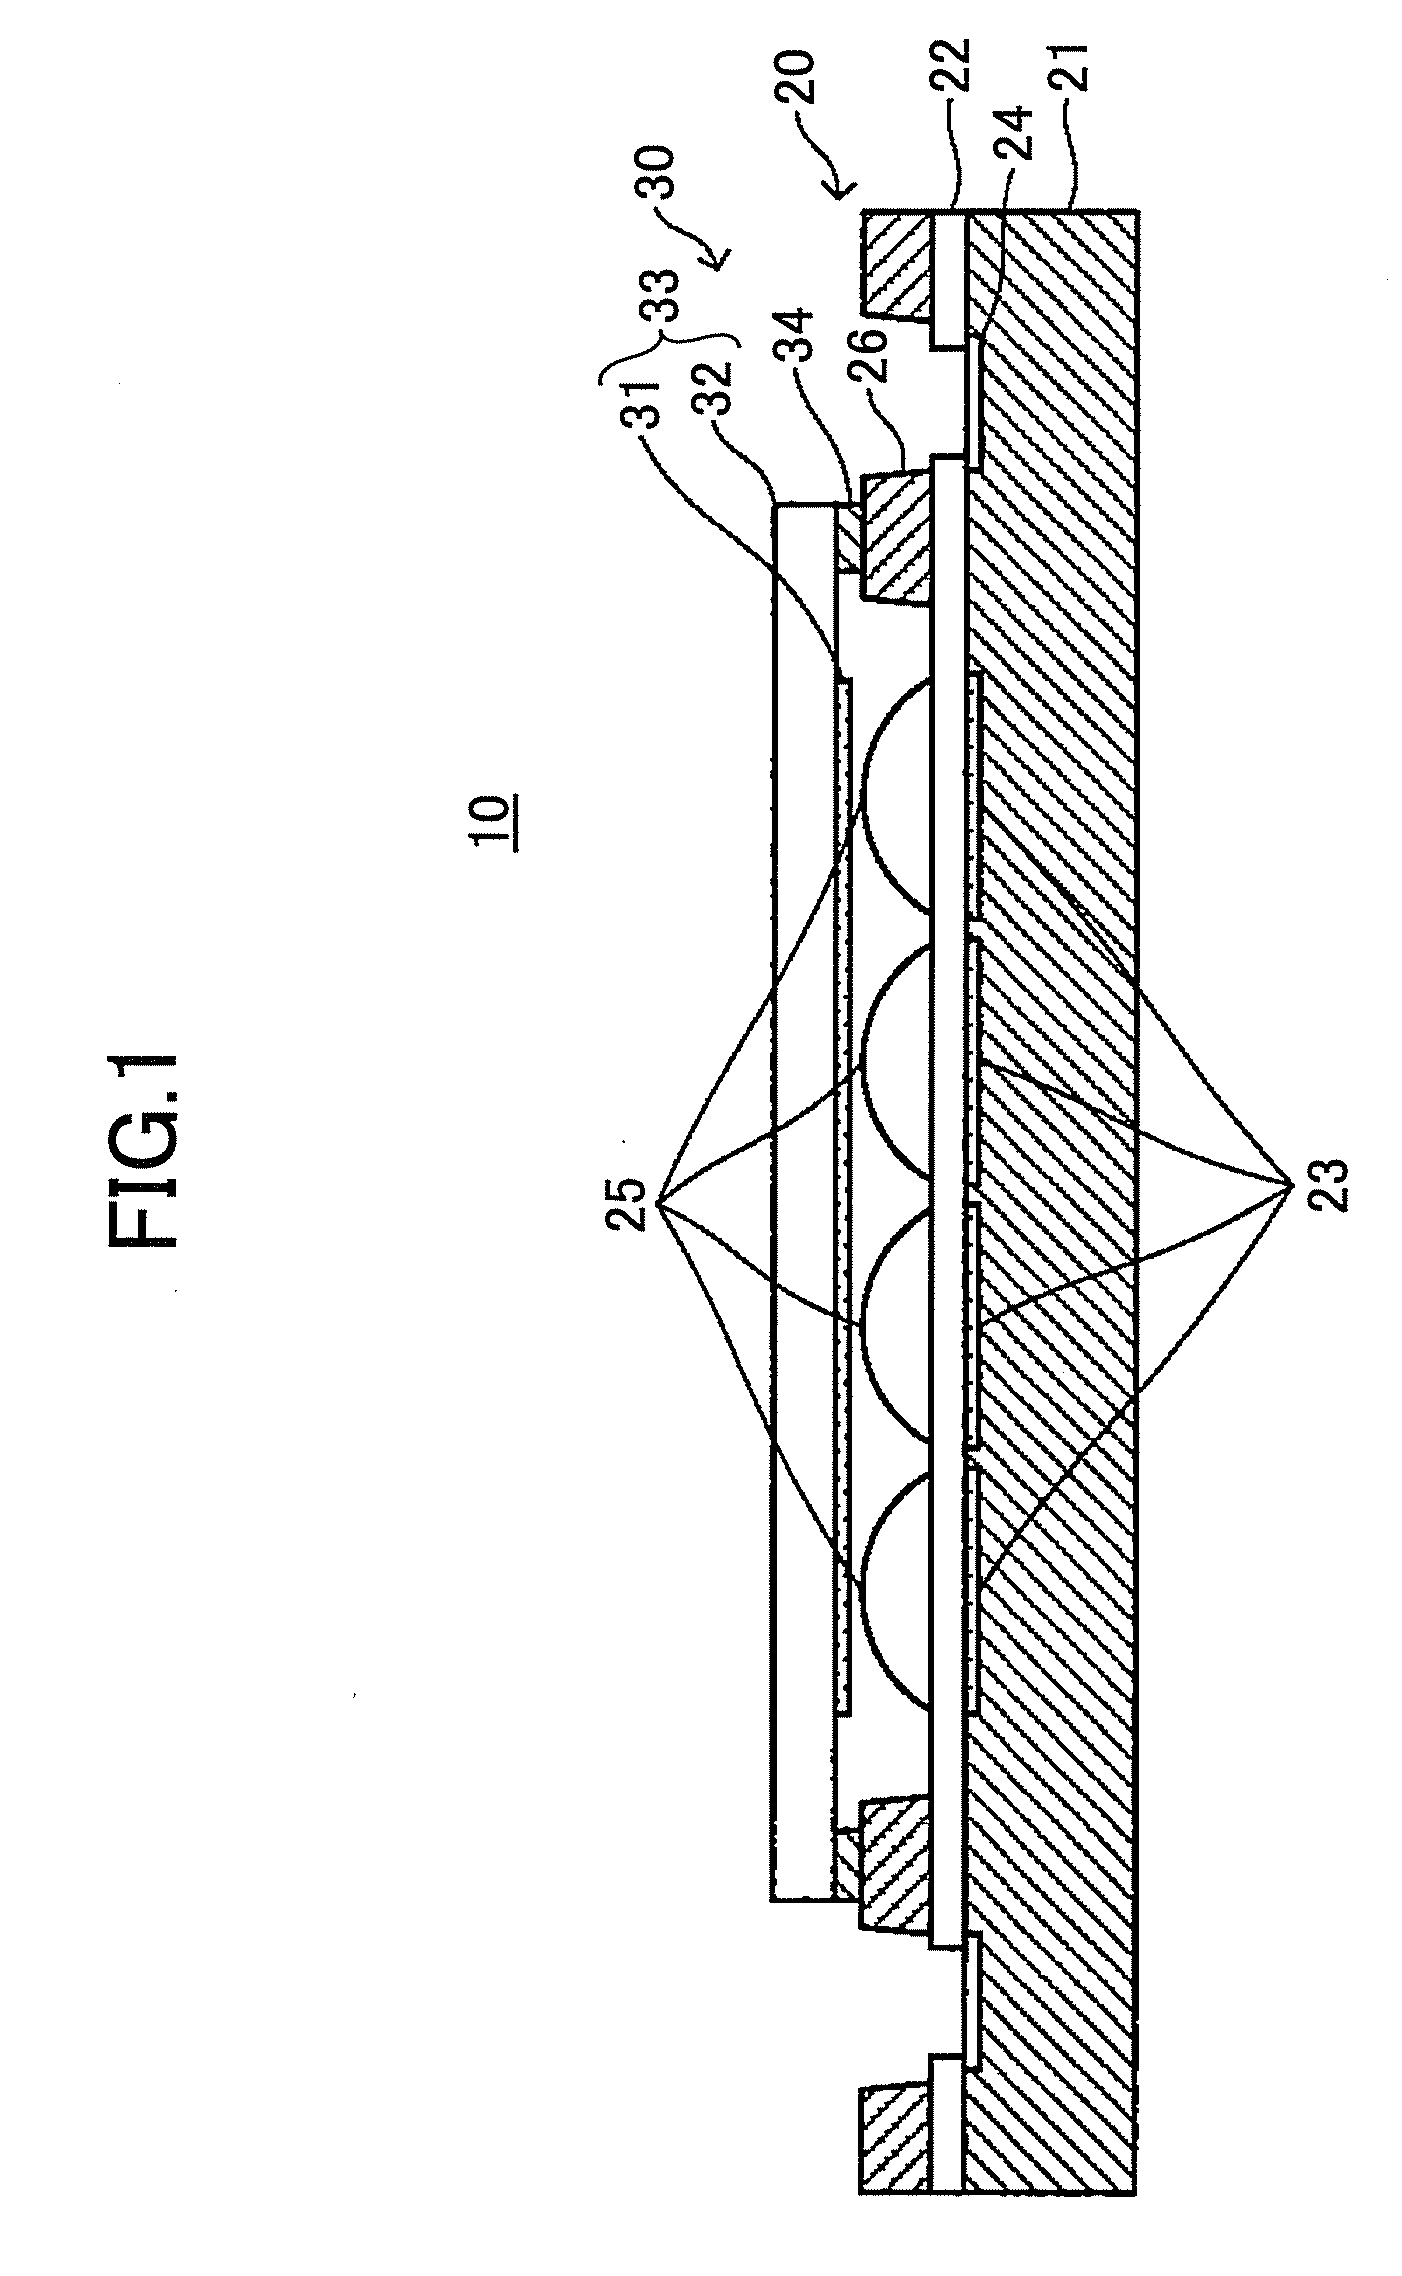 Imaging module, fabricating method therefor, and imaging device